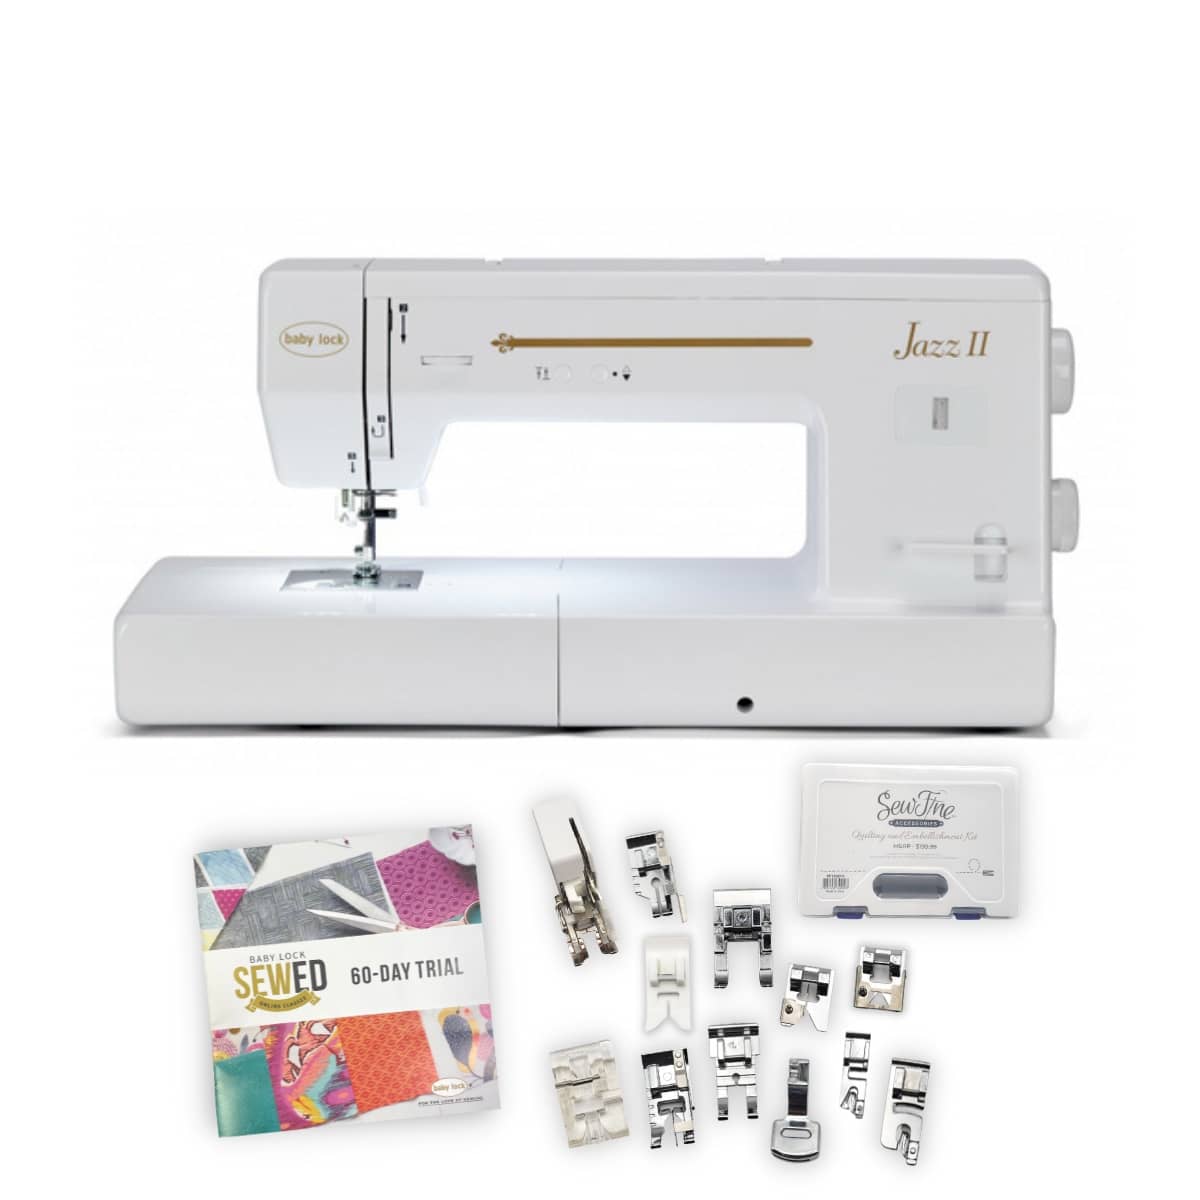 Janome 2212 Mechanical Sewing Machine : Sewing Parts Online